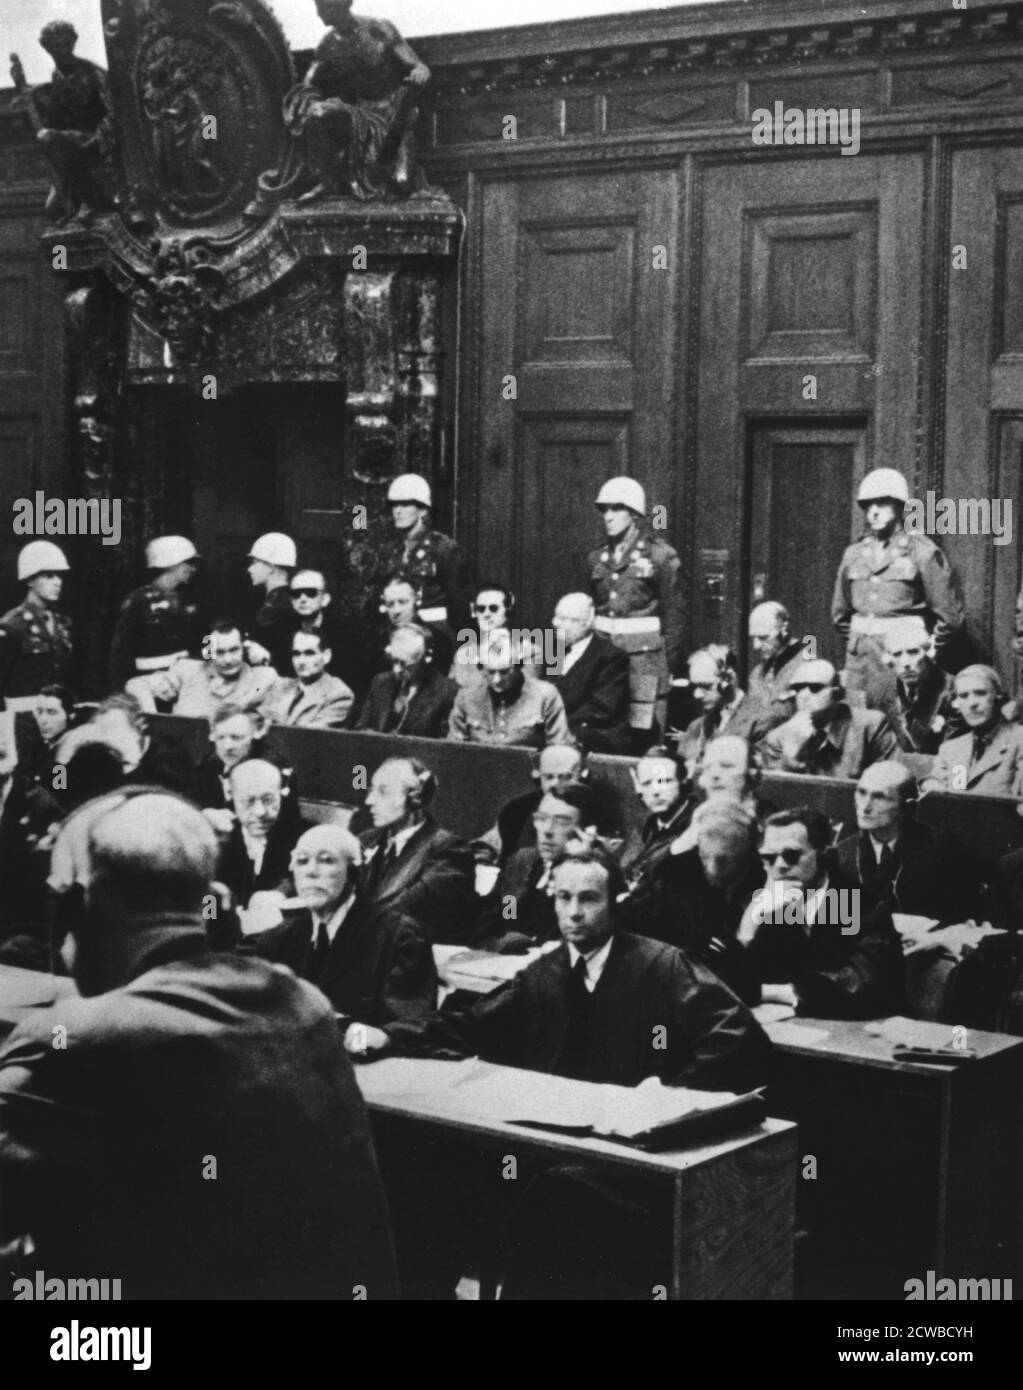 Nuremberg war crimes trial, Germany, 1946. Between 20 November 1945 and 1 October 1946 the 24 surviving most senior Nazi leaders were tried before the International Military Tribunal in the Palace of Justice in Nuremberg. The defendants are ack row (left to right): Admiral Karl Doenitz, Admiral Erich Raeder, Baldur von Schirach (leader of the Hitler Youth), Fritz Sauckel (head of the Nazi slave labour programme), General Alfred Jodl, Franz von Papen. Front row (left to right): Hermann Goering, Rudolf Hess, Joachim von Ribbentrop (Foreign Minister), Field Marshal Wilhelm Keitel, Alfred Rosenber Stock Photo